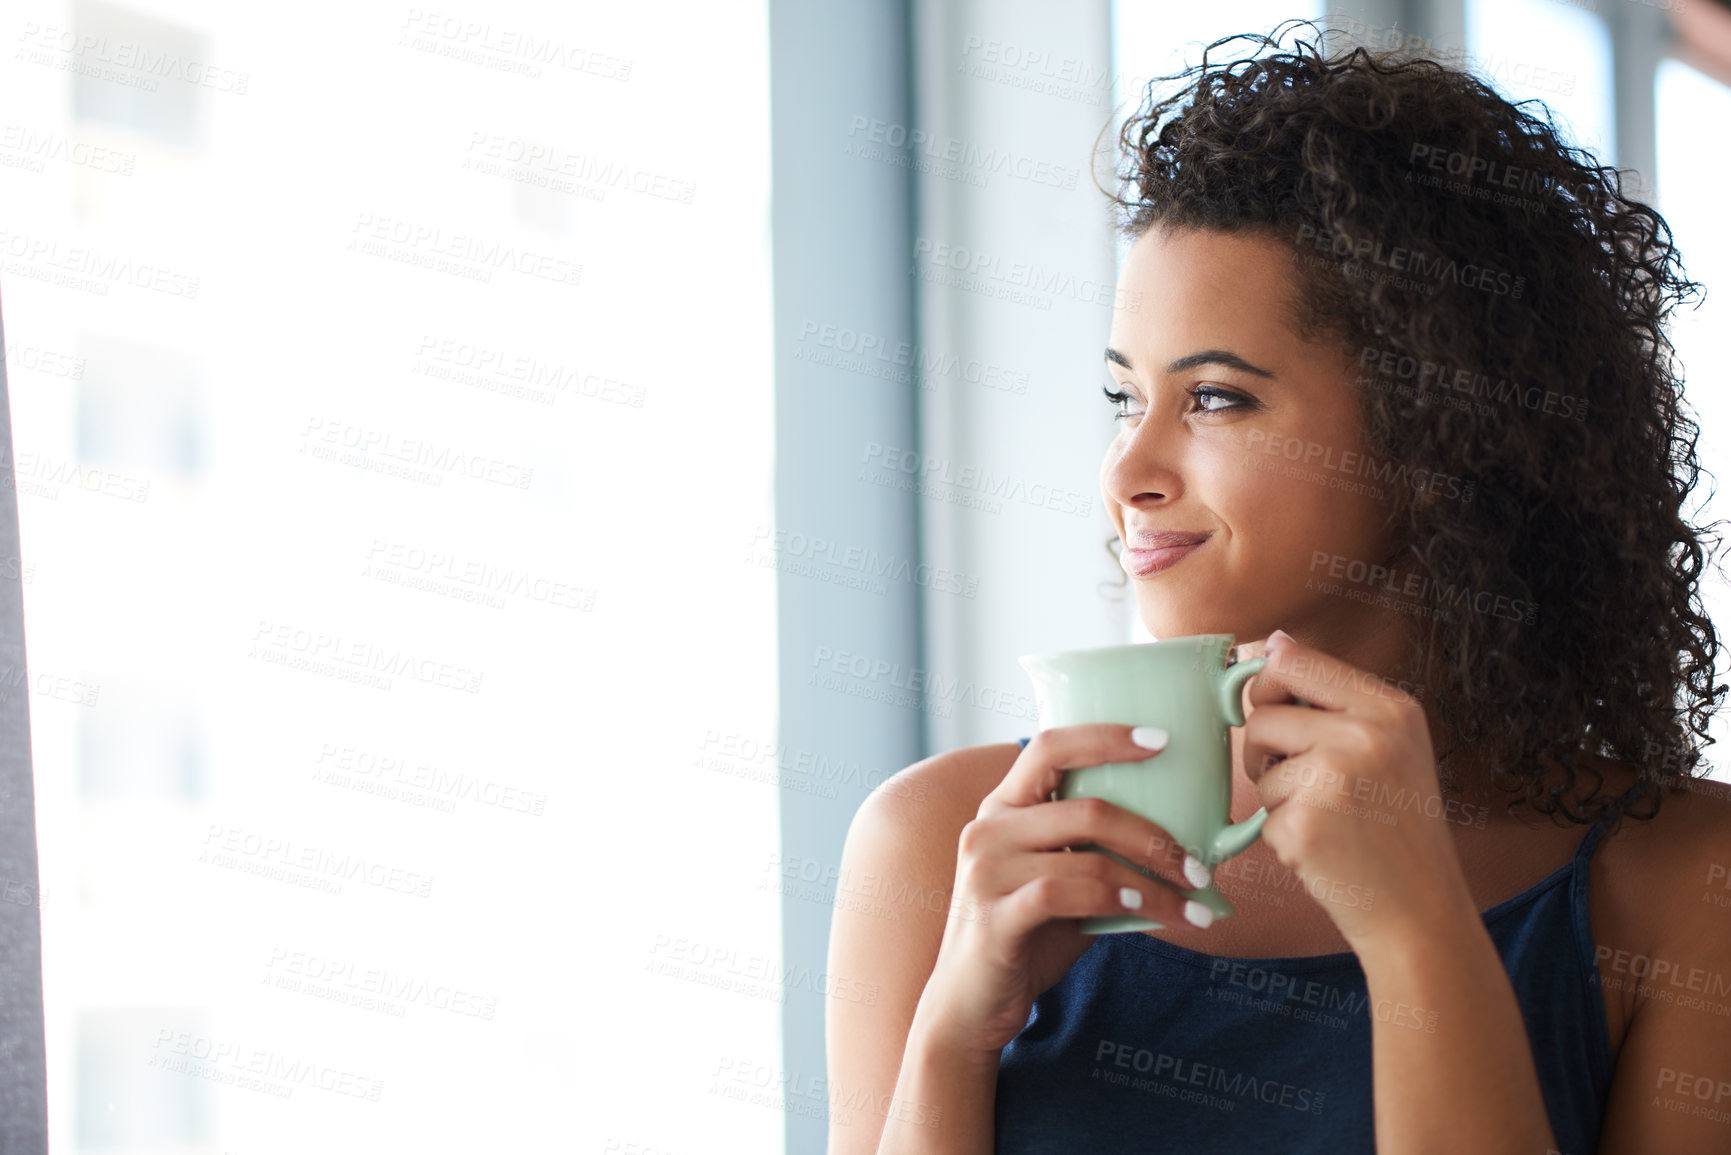 Buy stock photo Shot of an attractive young woman holding a coffee mug and looking out the window in the morning